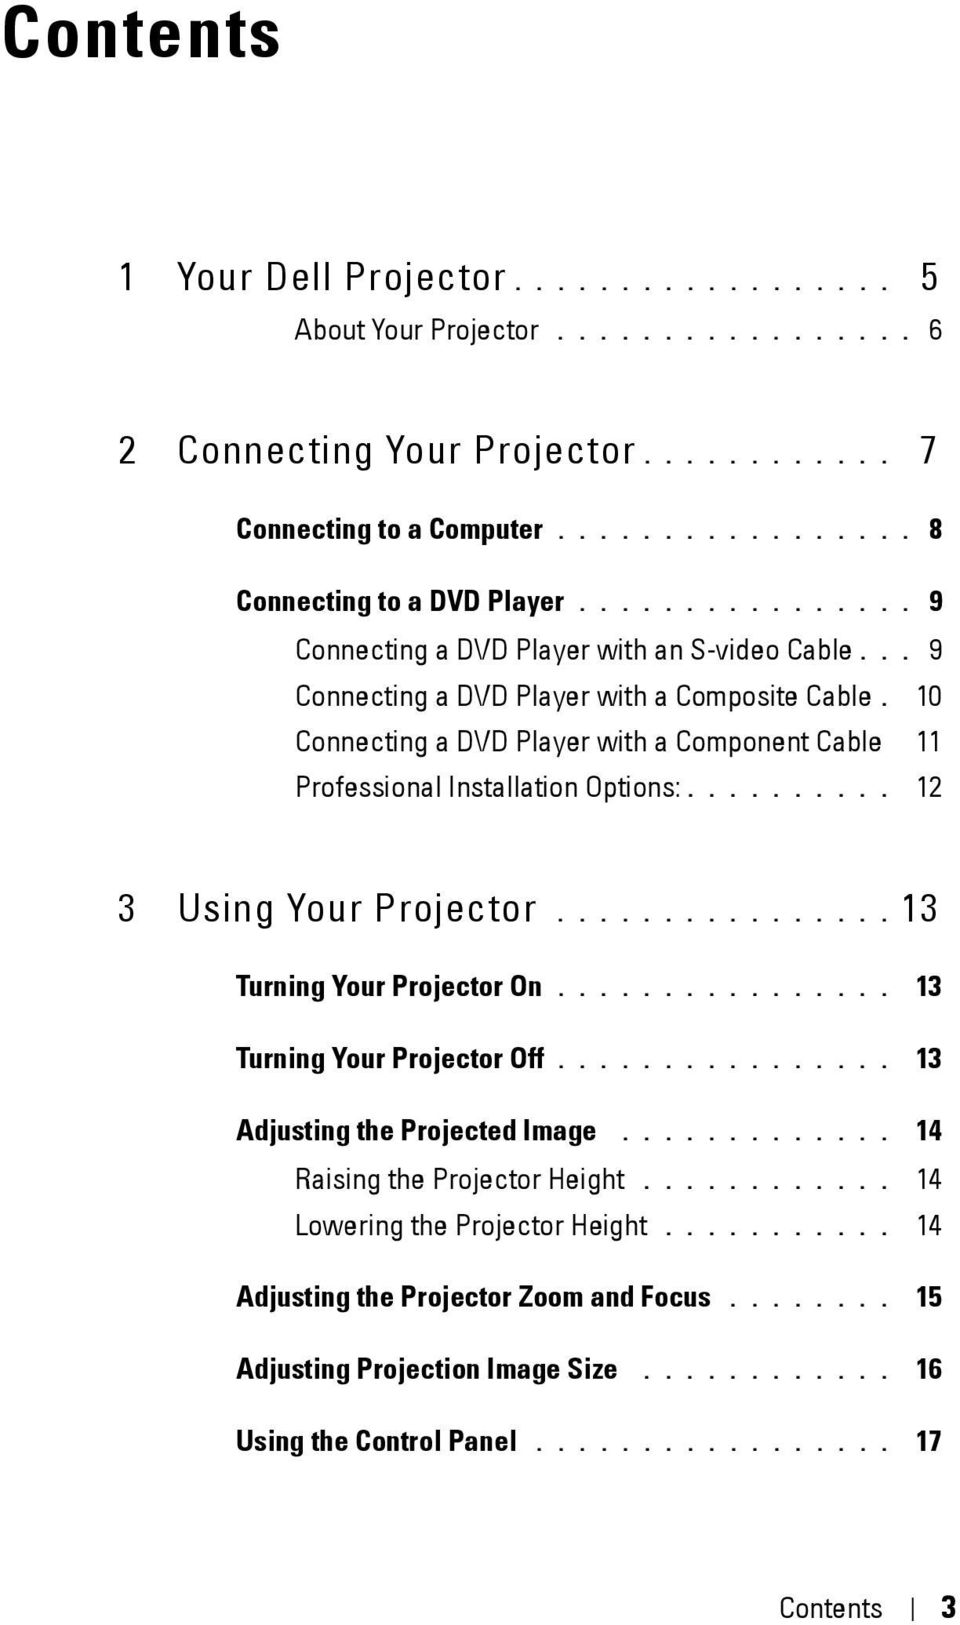 10 Connecting a DVD Player with a Component Cable 11 Professional Installation Options:.......... 12 3 Using Your Projector................ 13 Turning Your Projector On................ 13 Turning Your Projector Off.